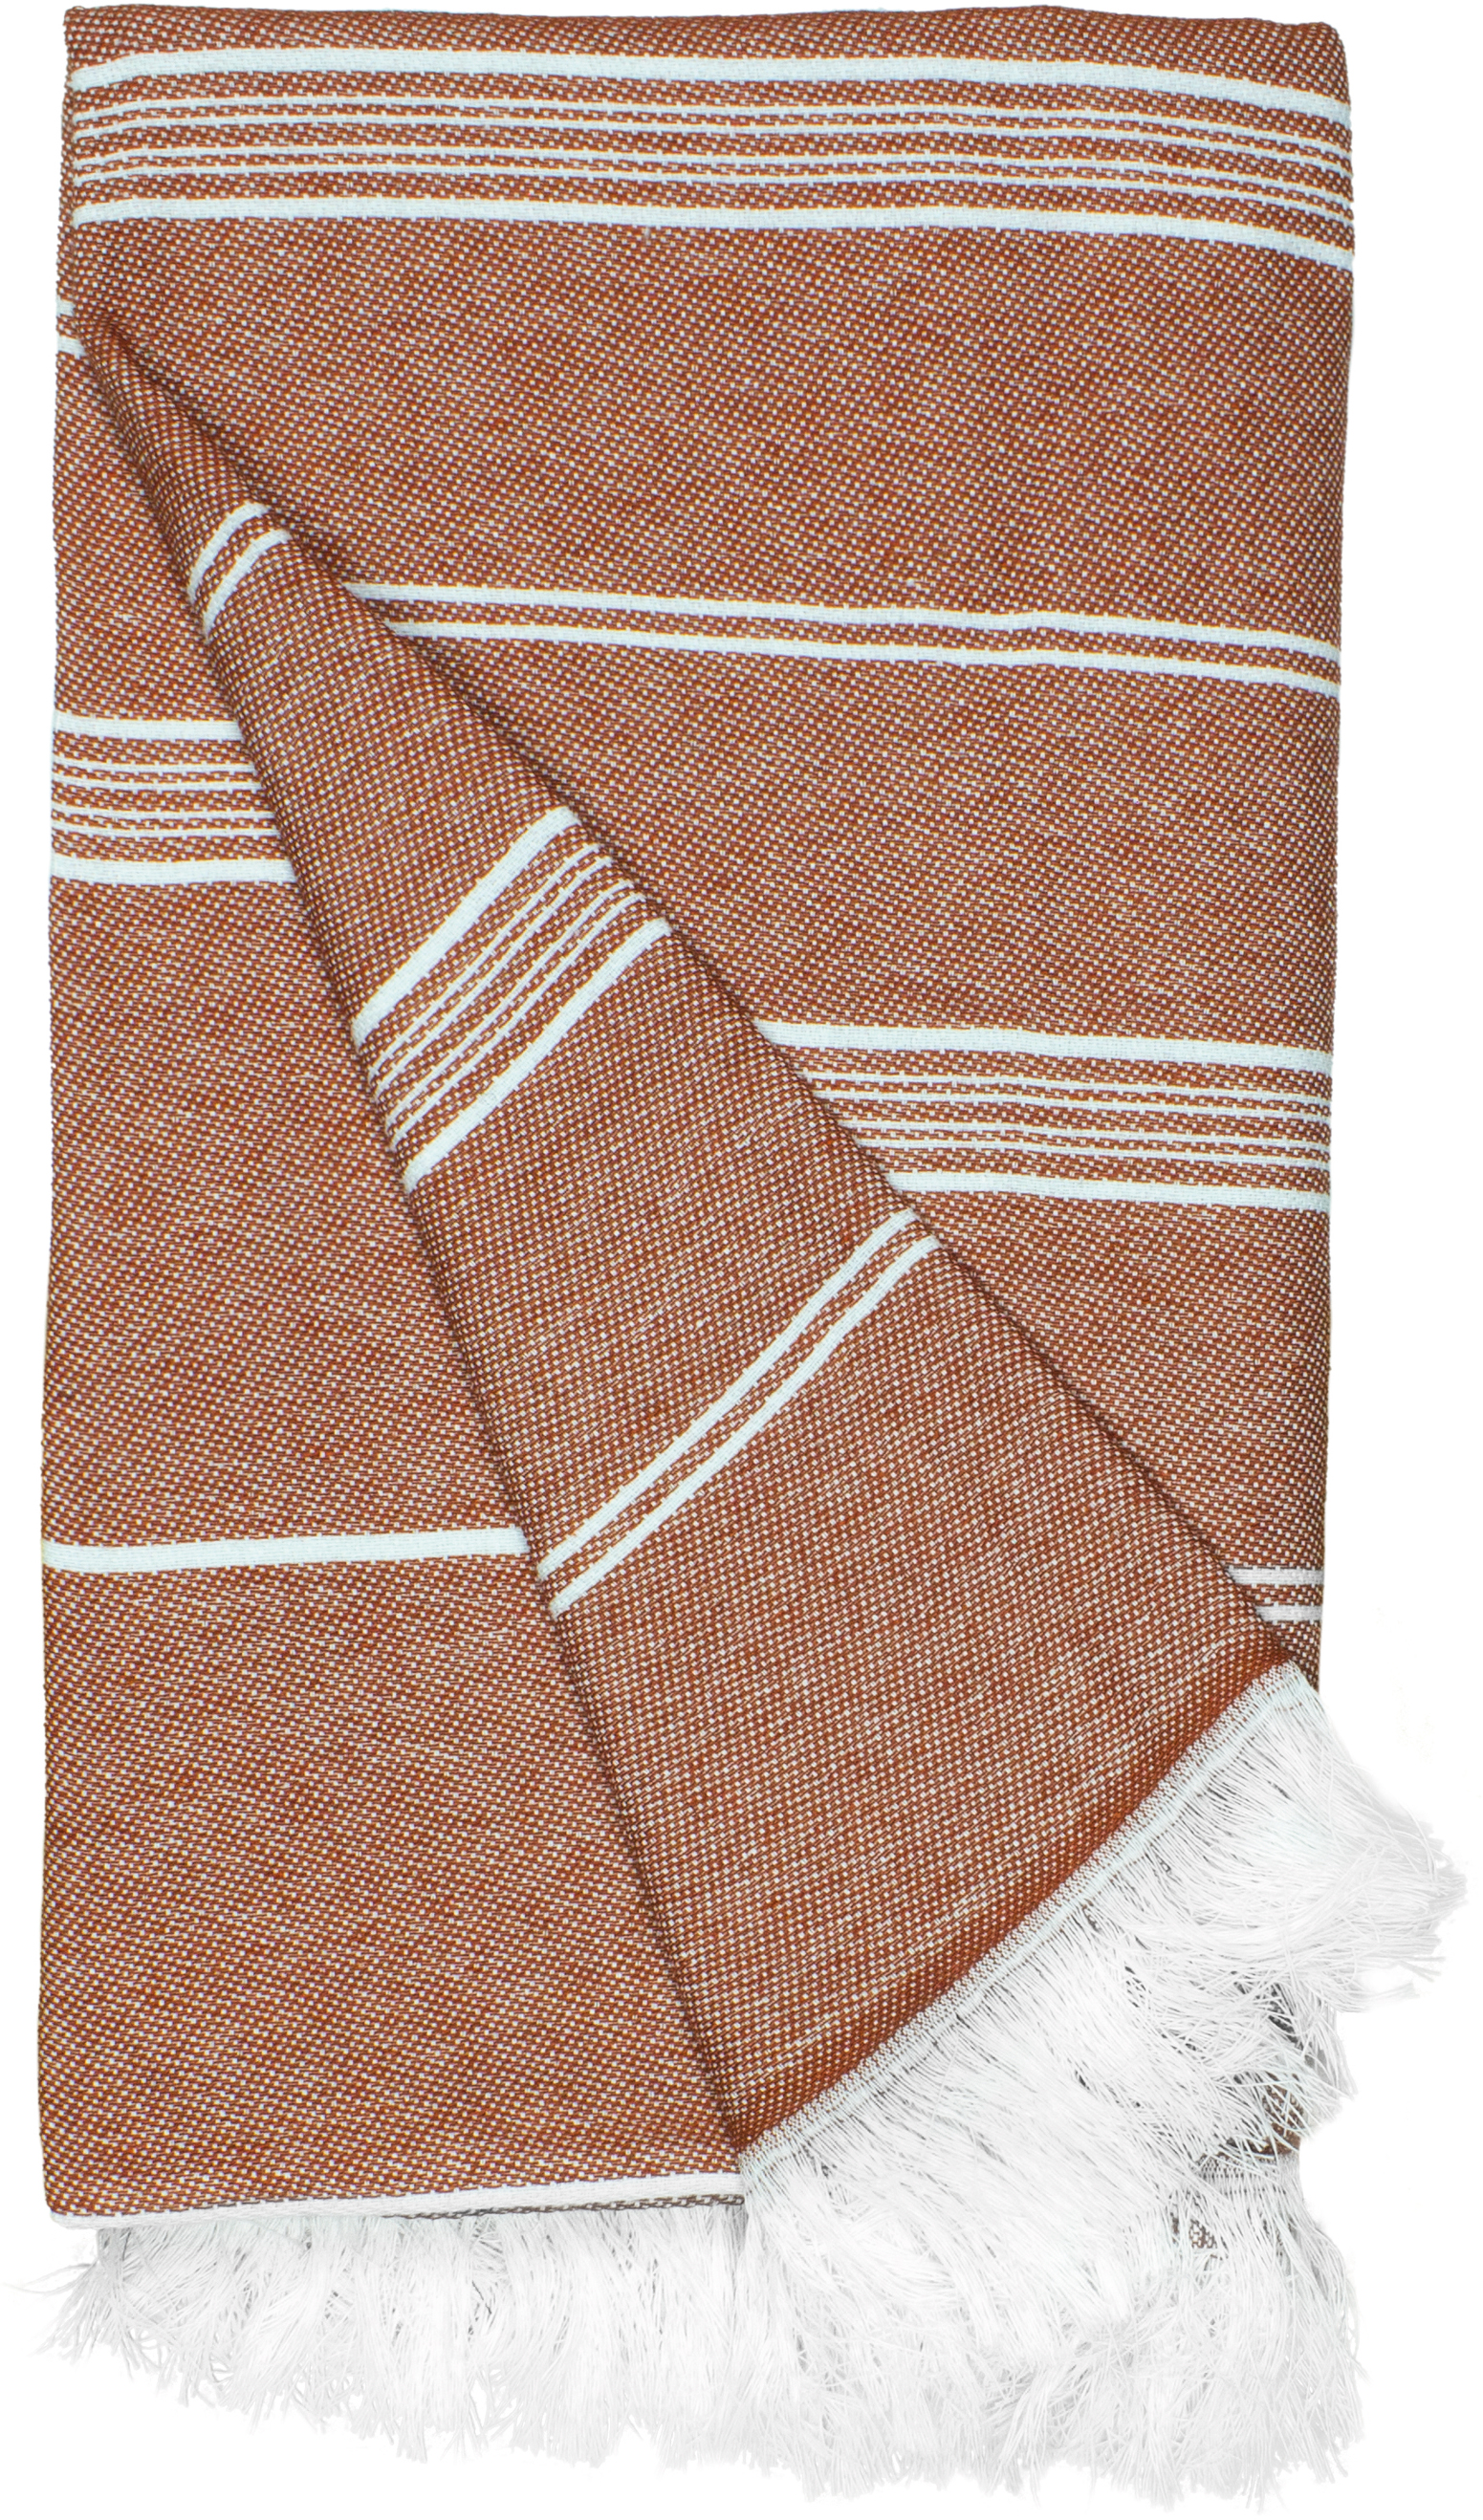 The One | Recycled Hamam Towel